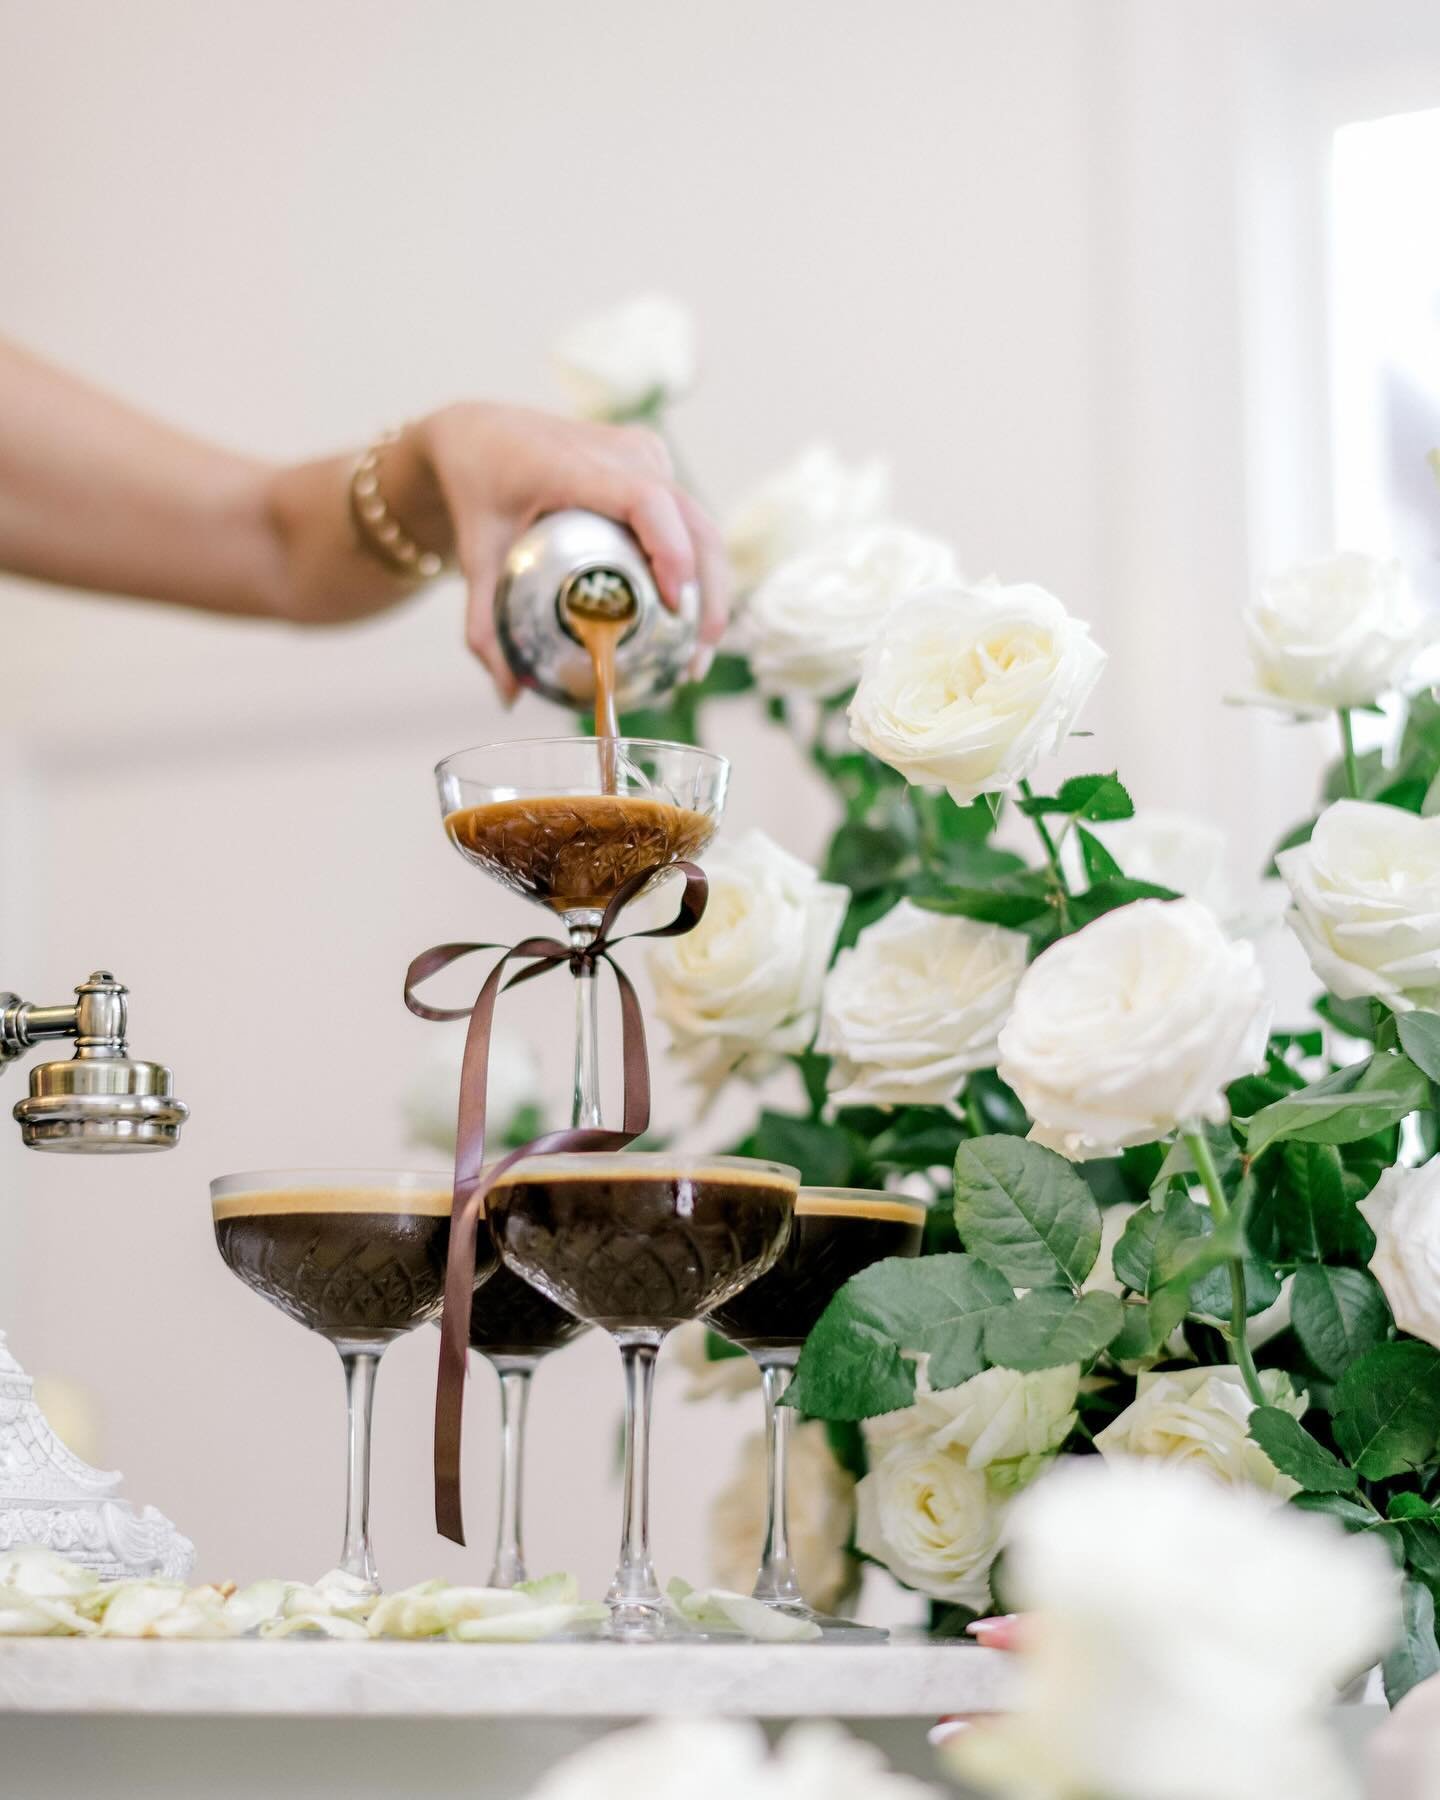 Espresso martini tower? Sign us up! ✔️
Discuss with our event specialists to include this to your package. 

Styling, Planning &amp; Florals @ivyandbleuevents
Photography @kaitlinmareephotography
Content Creation @taycapturescontent_
Venue @kwila.lod